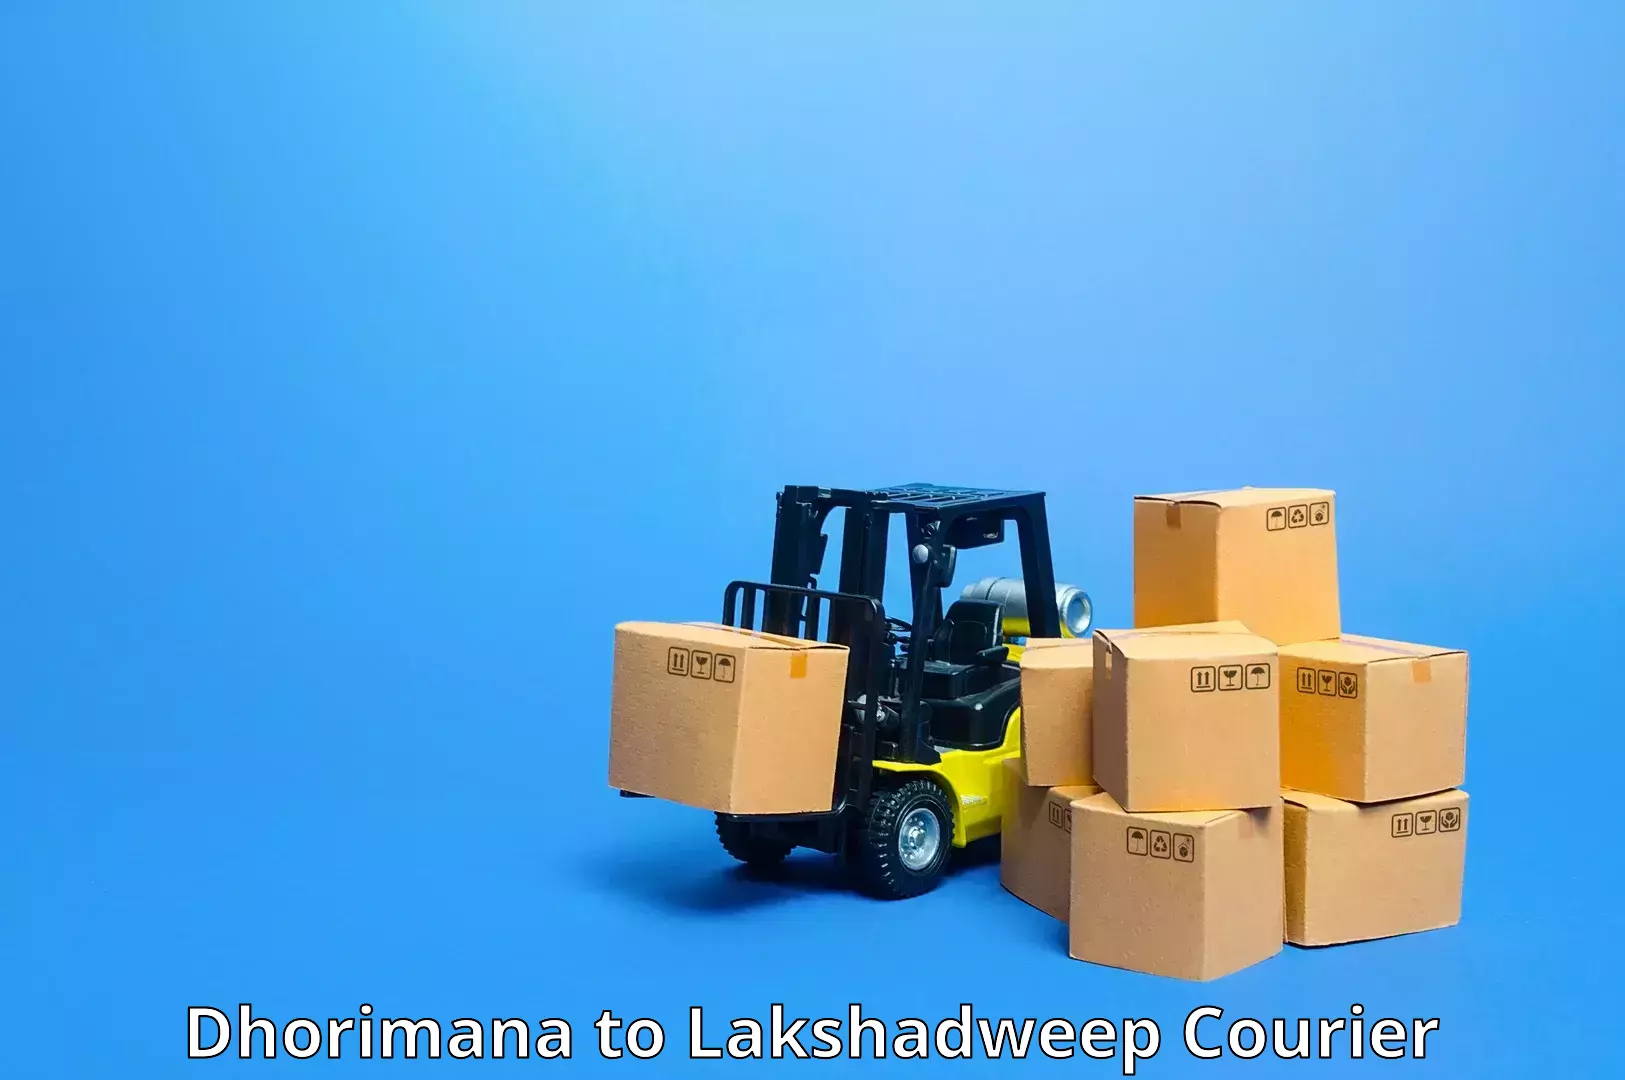 Fast delivery service Dhorimana to Lakshadweep